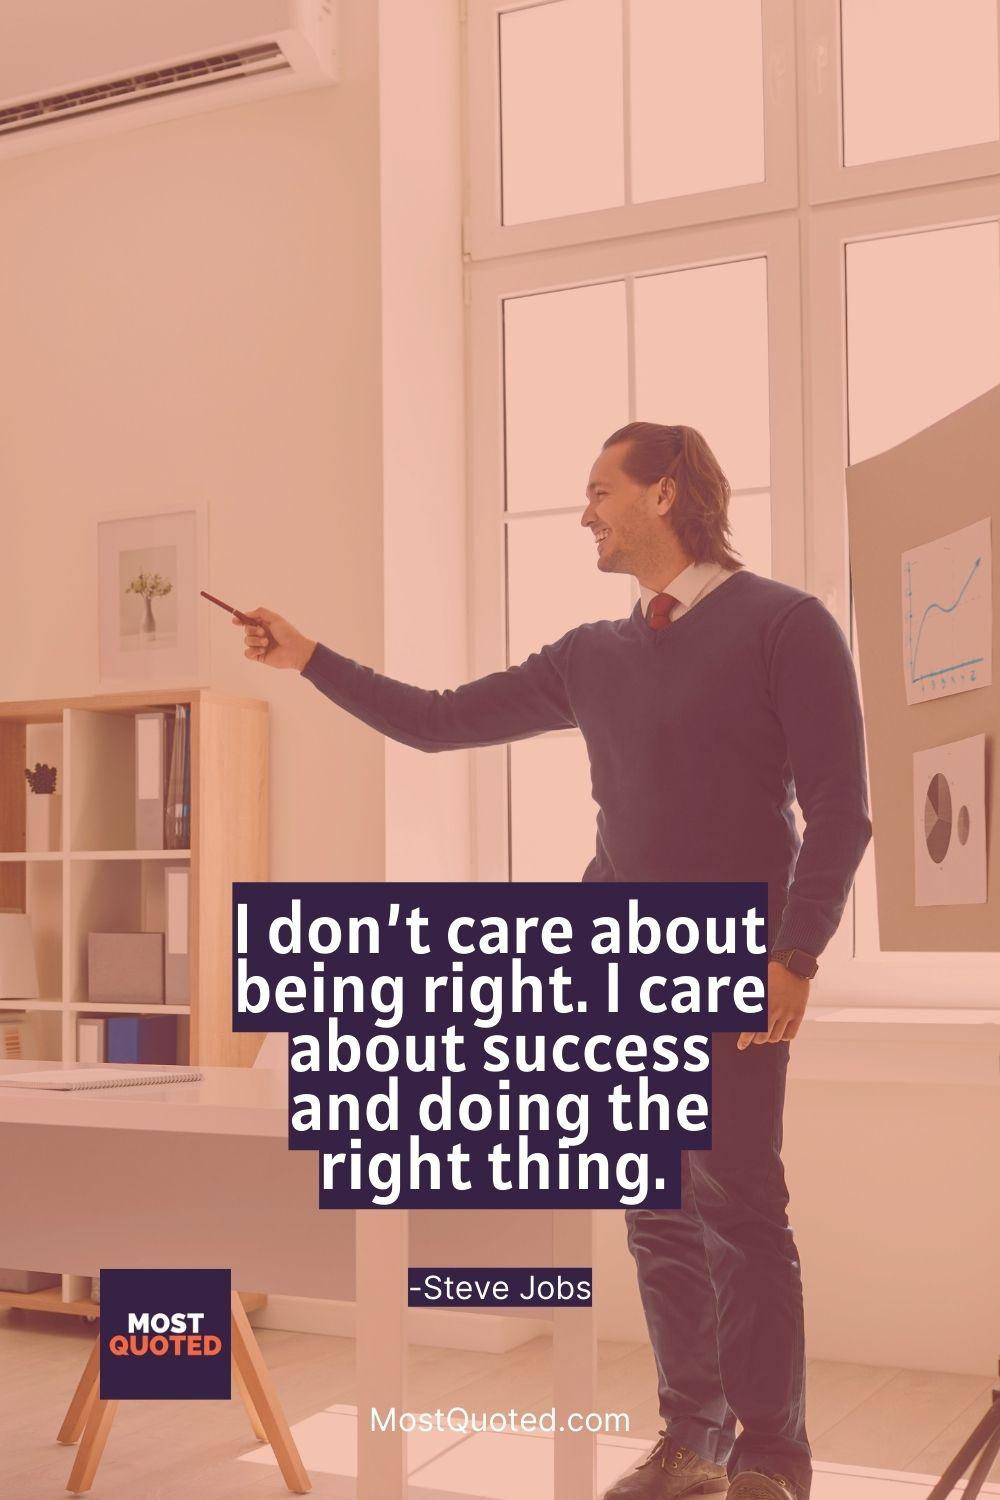 I don’t care about being right. I care about success and doing the right thing. - Steve Jobs